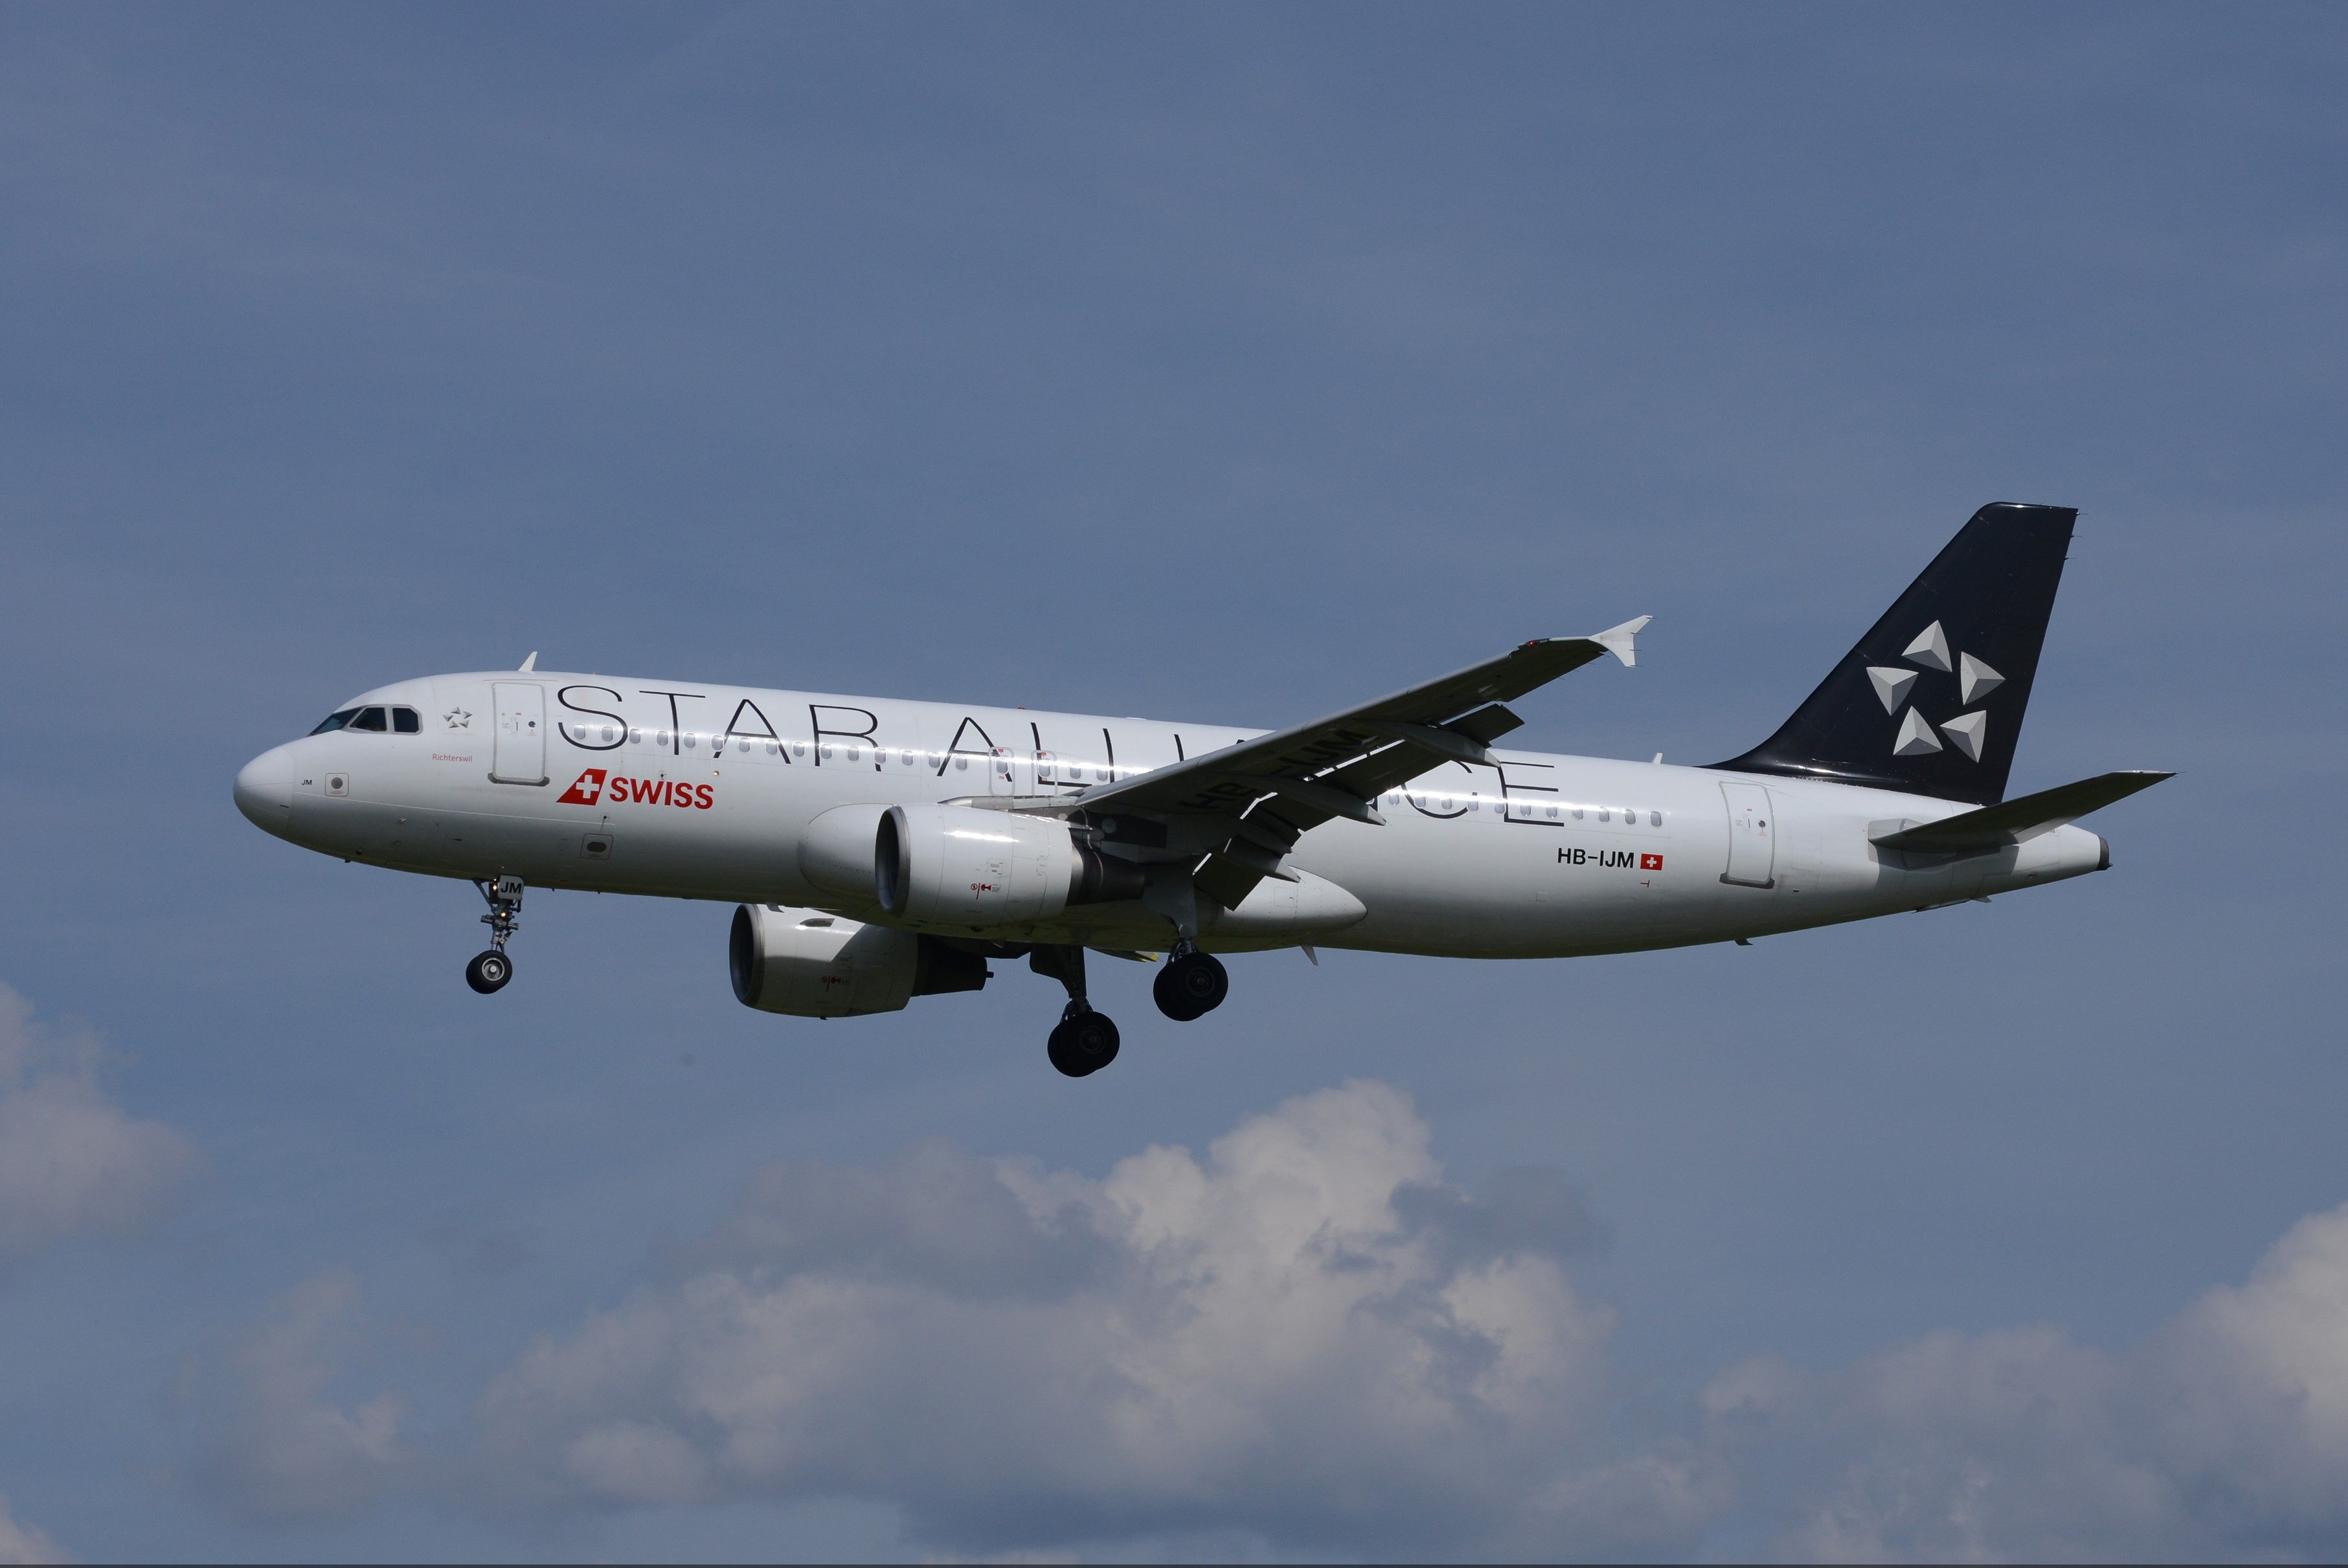 A SWISS Airbus A320 in Star Alliance Livery.